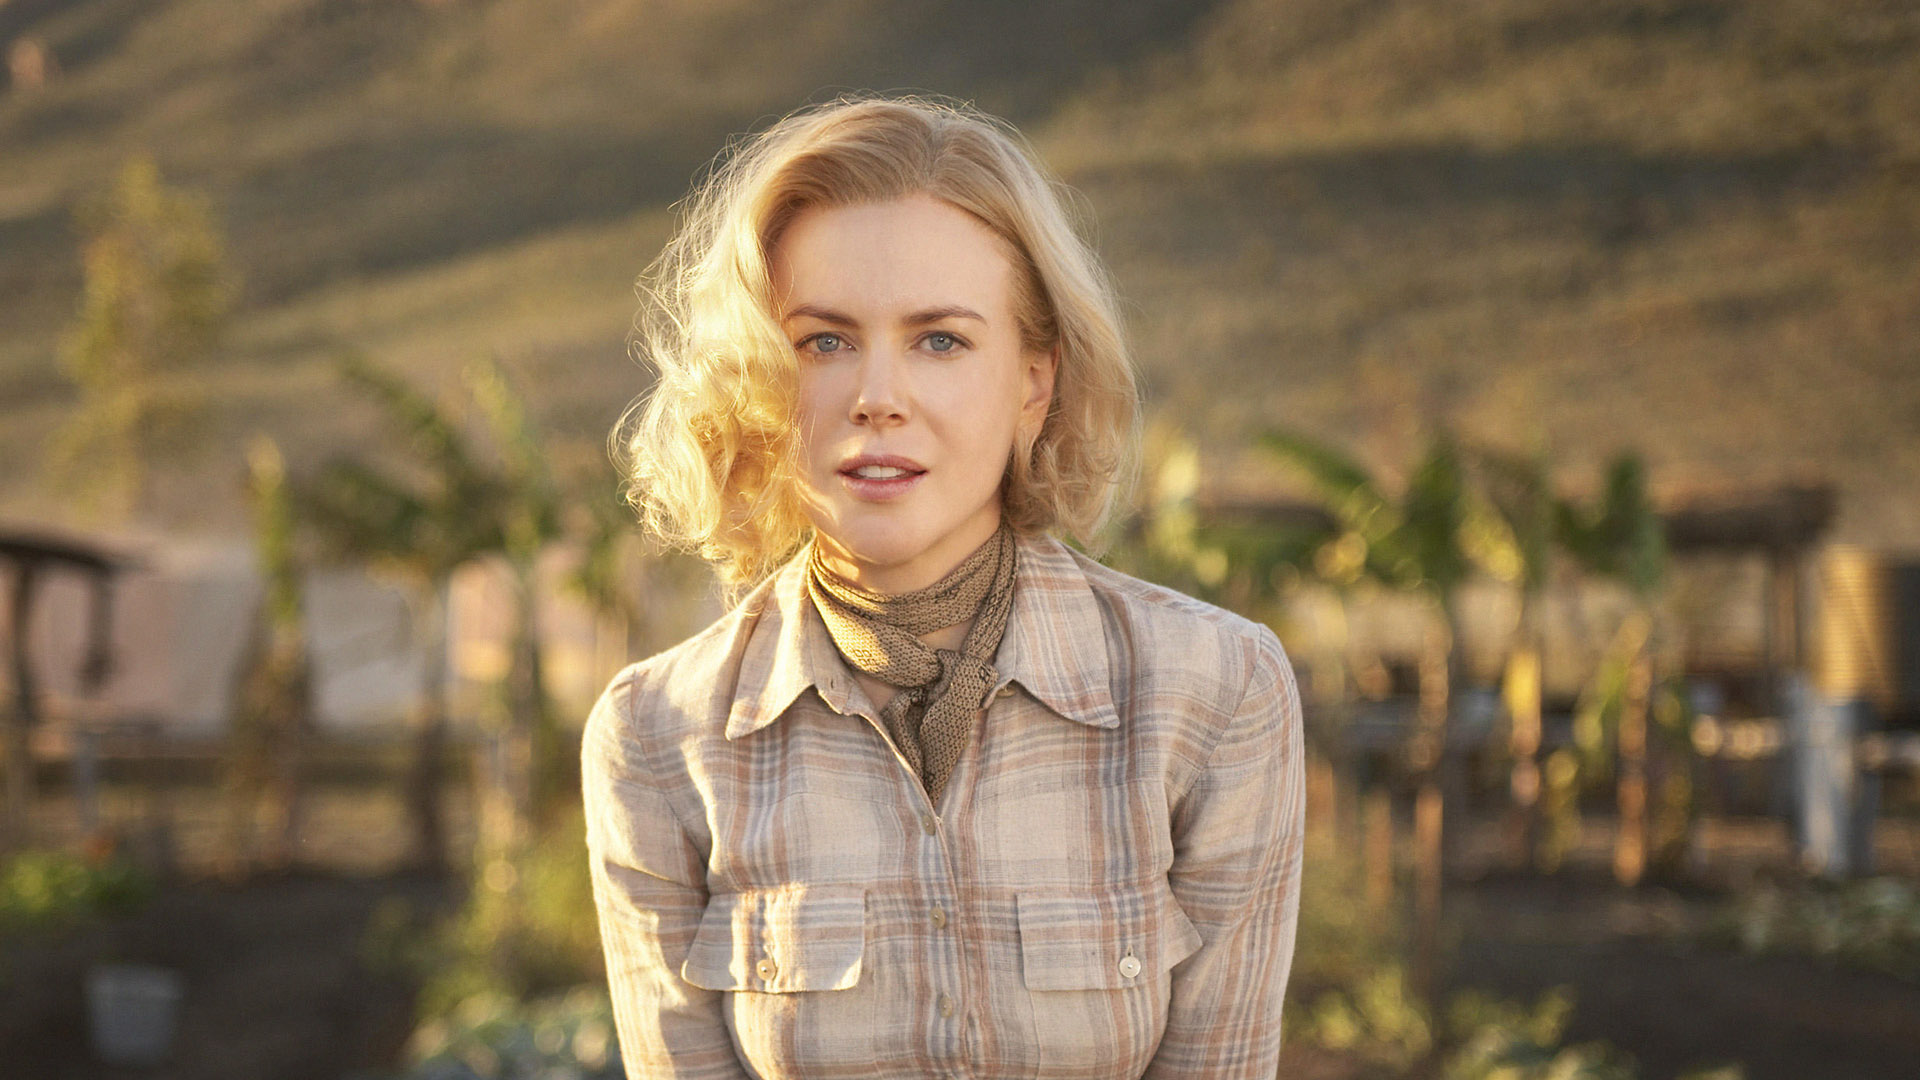 A Movie Nicole Kidman Refused to Star In Ended Up With $678 Million & 6 Oscars